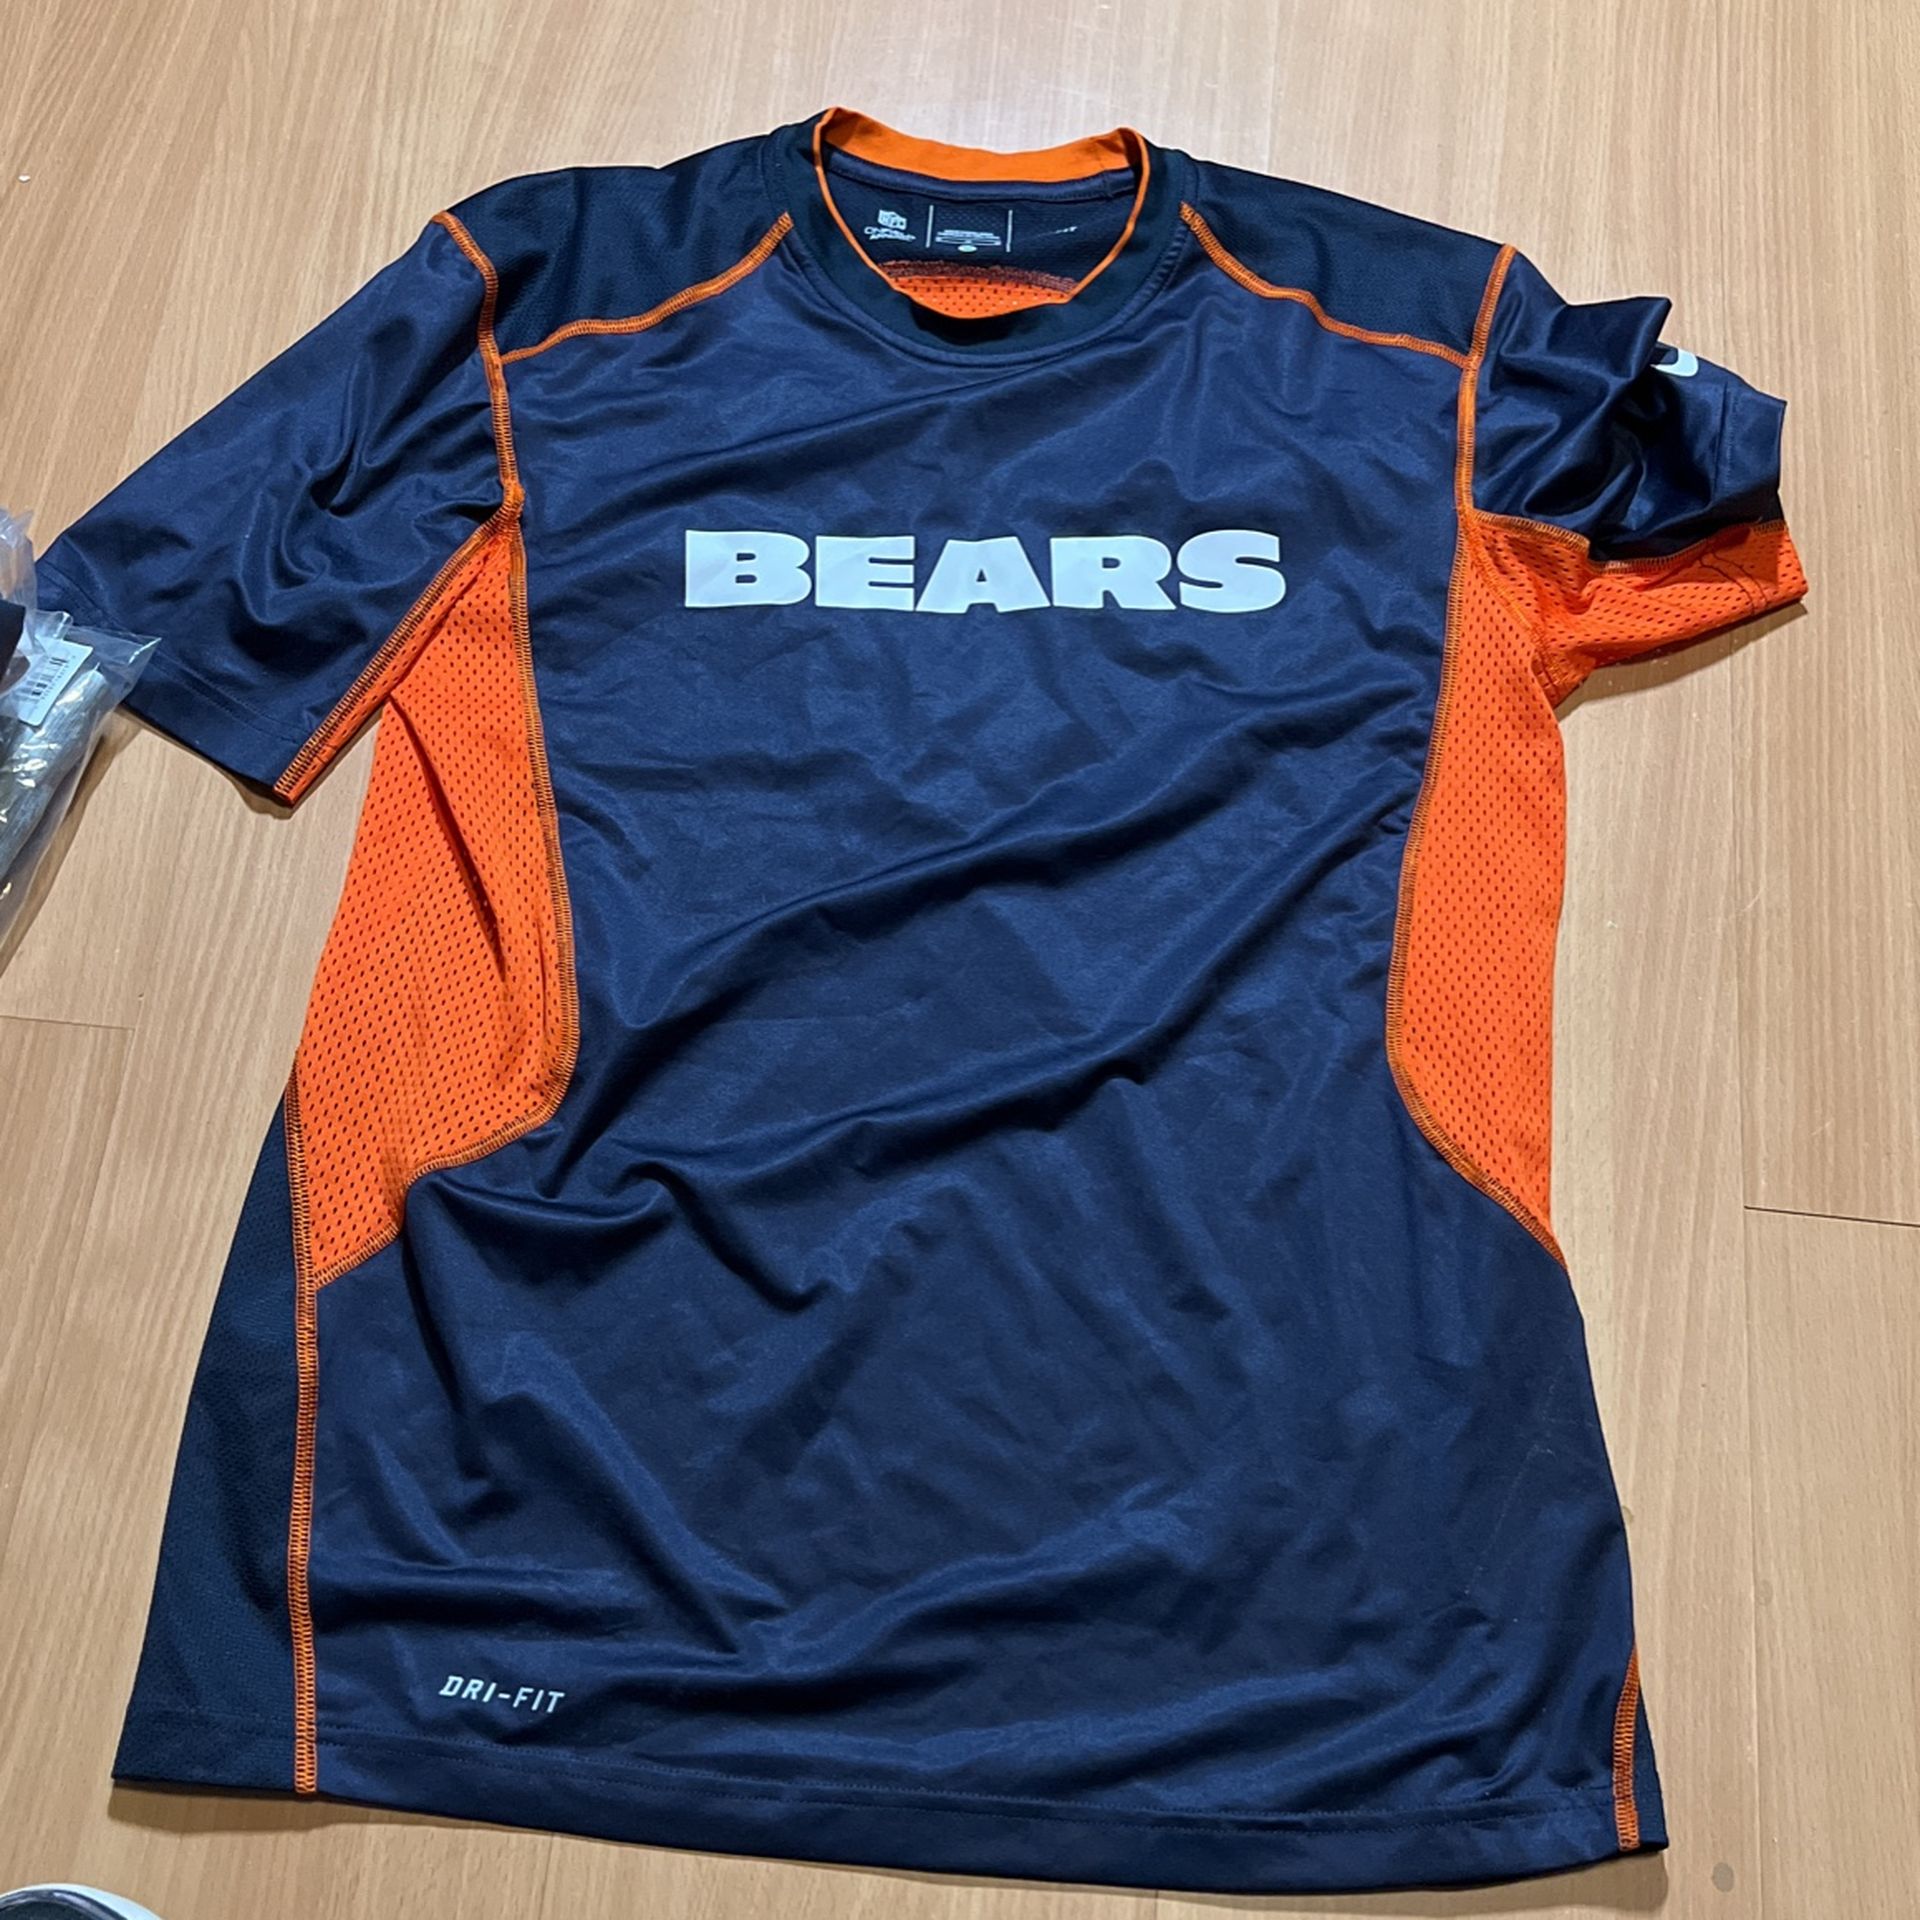 Bears Jersey For Boys Size M 